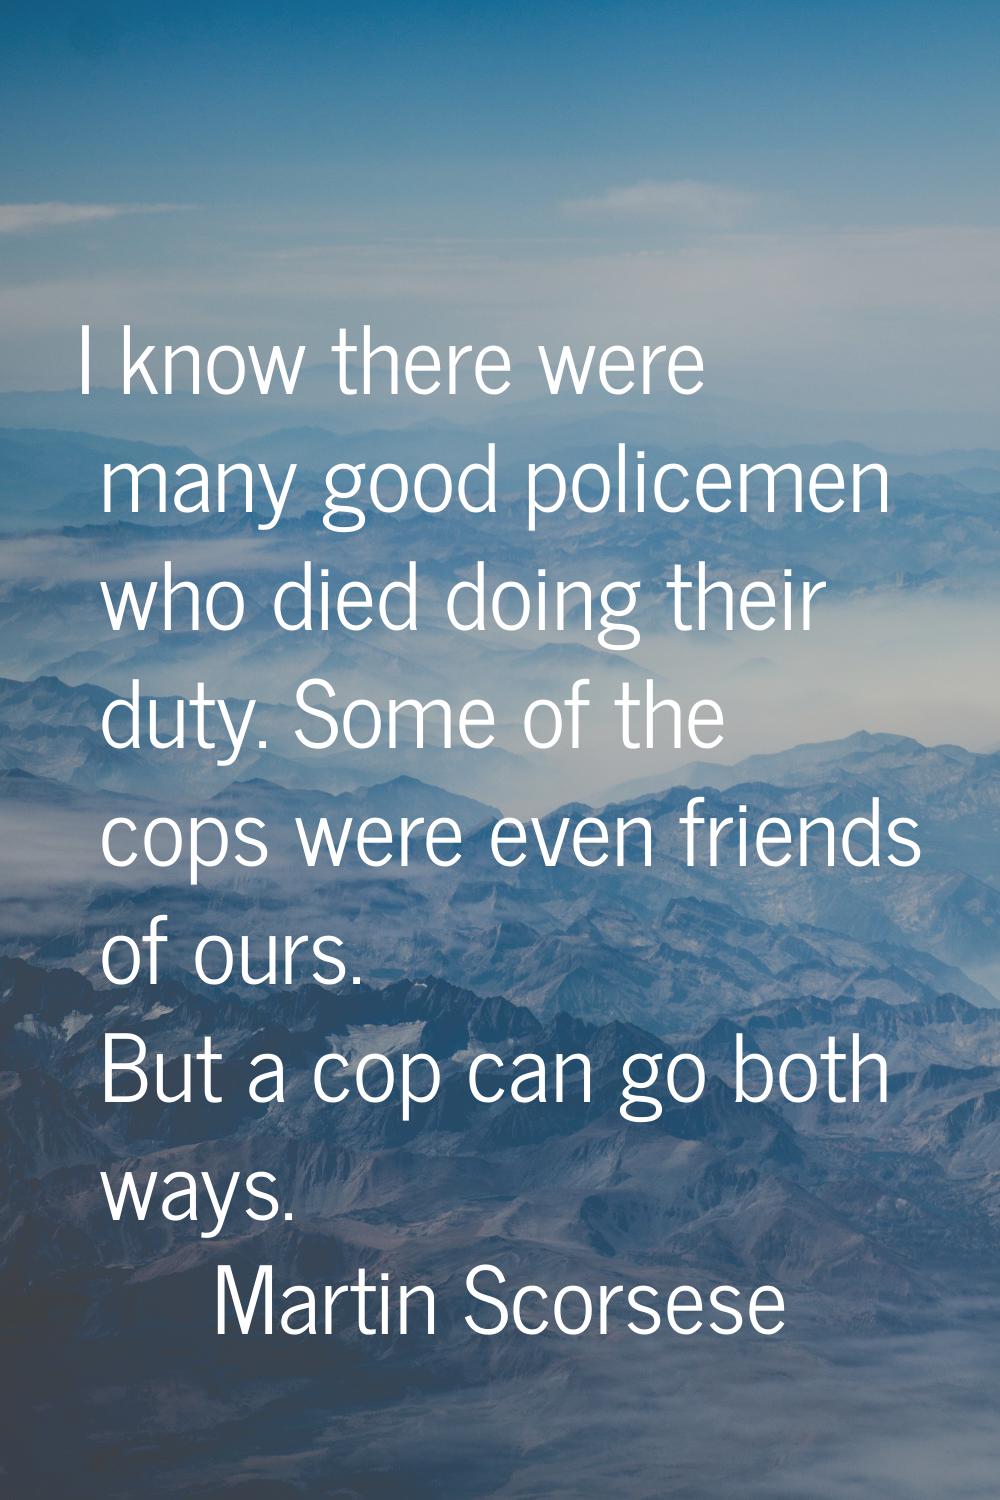 I know there were many good policemen who died doing their duty. Some of the cops were even friends